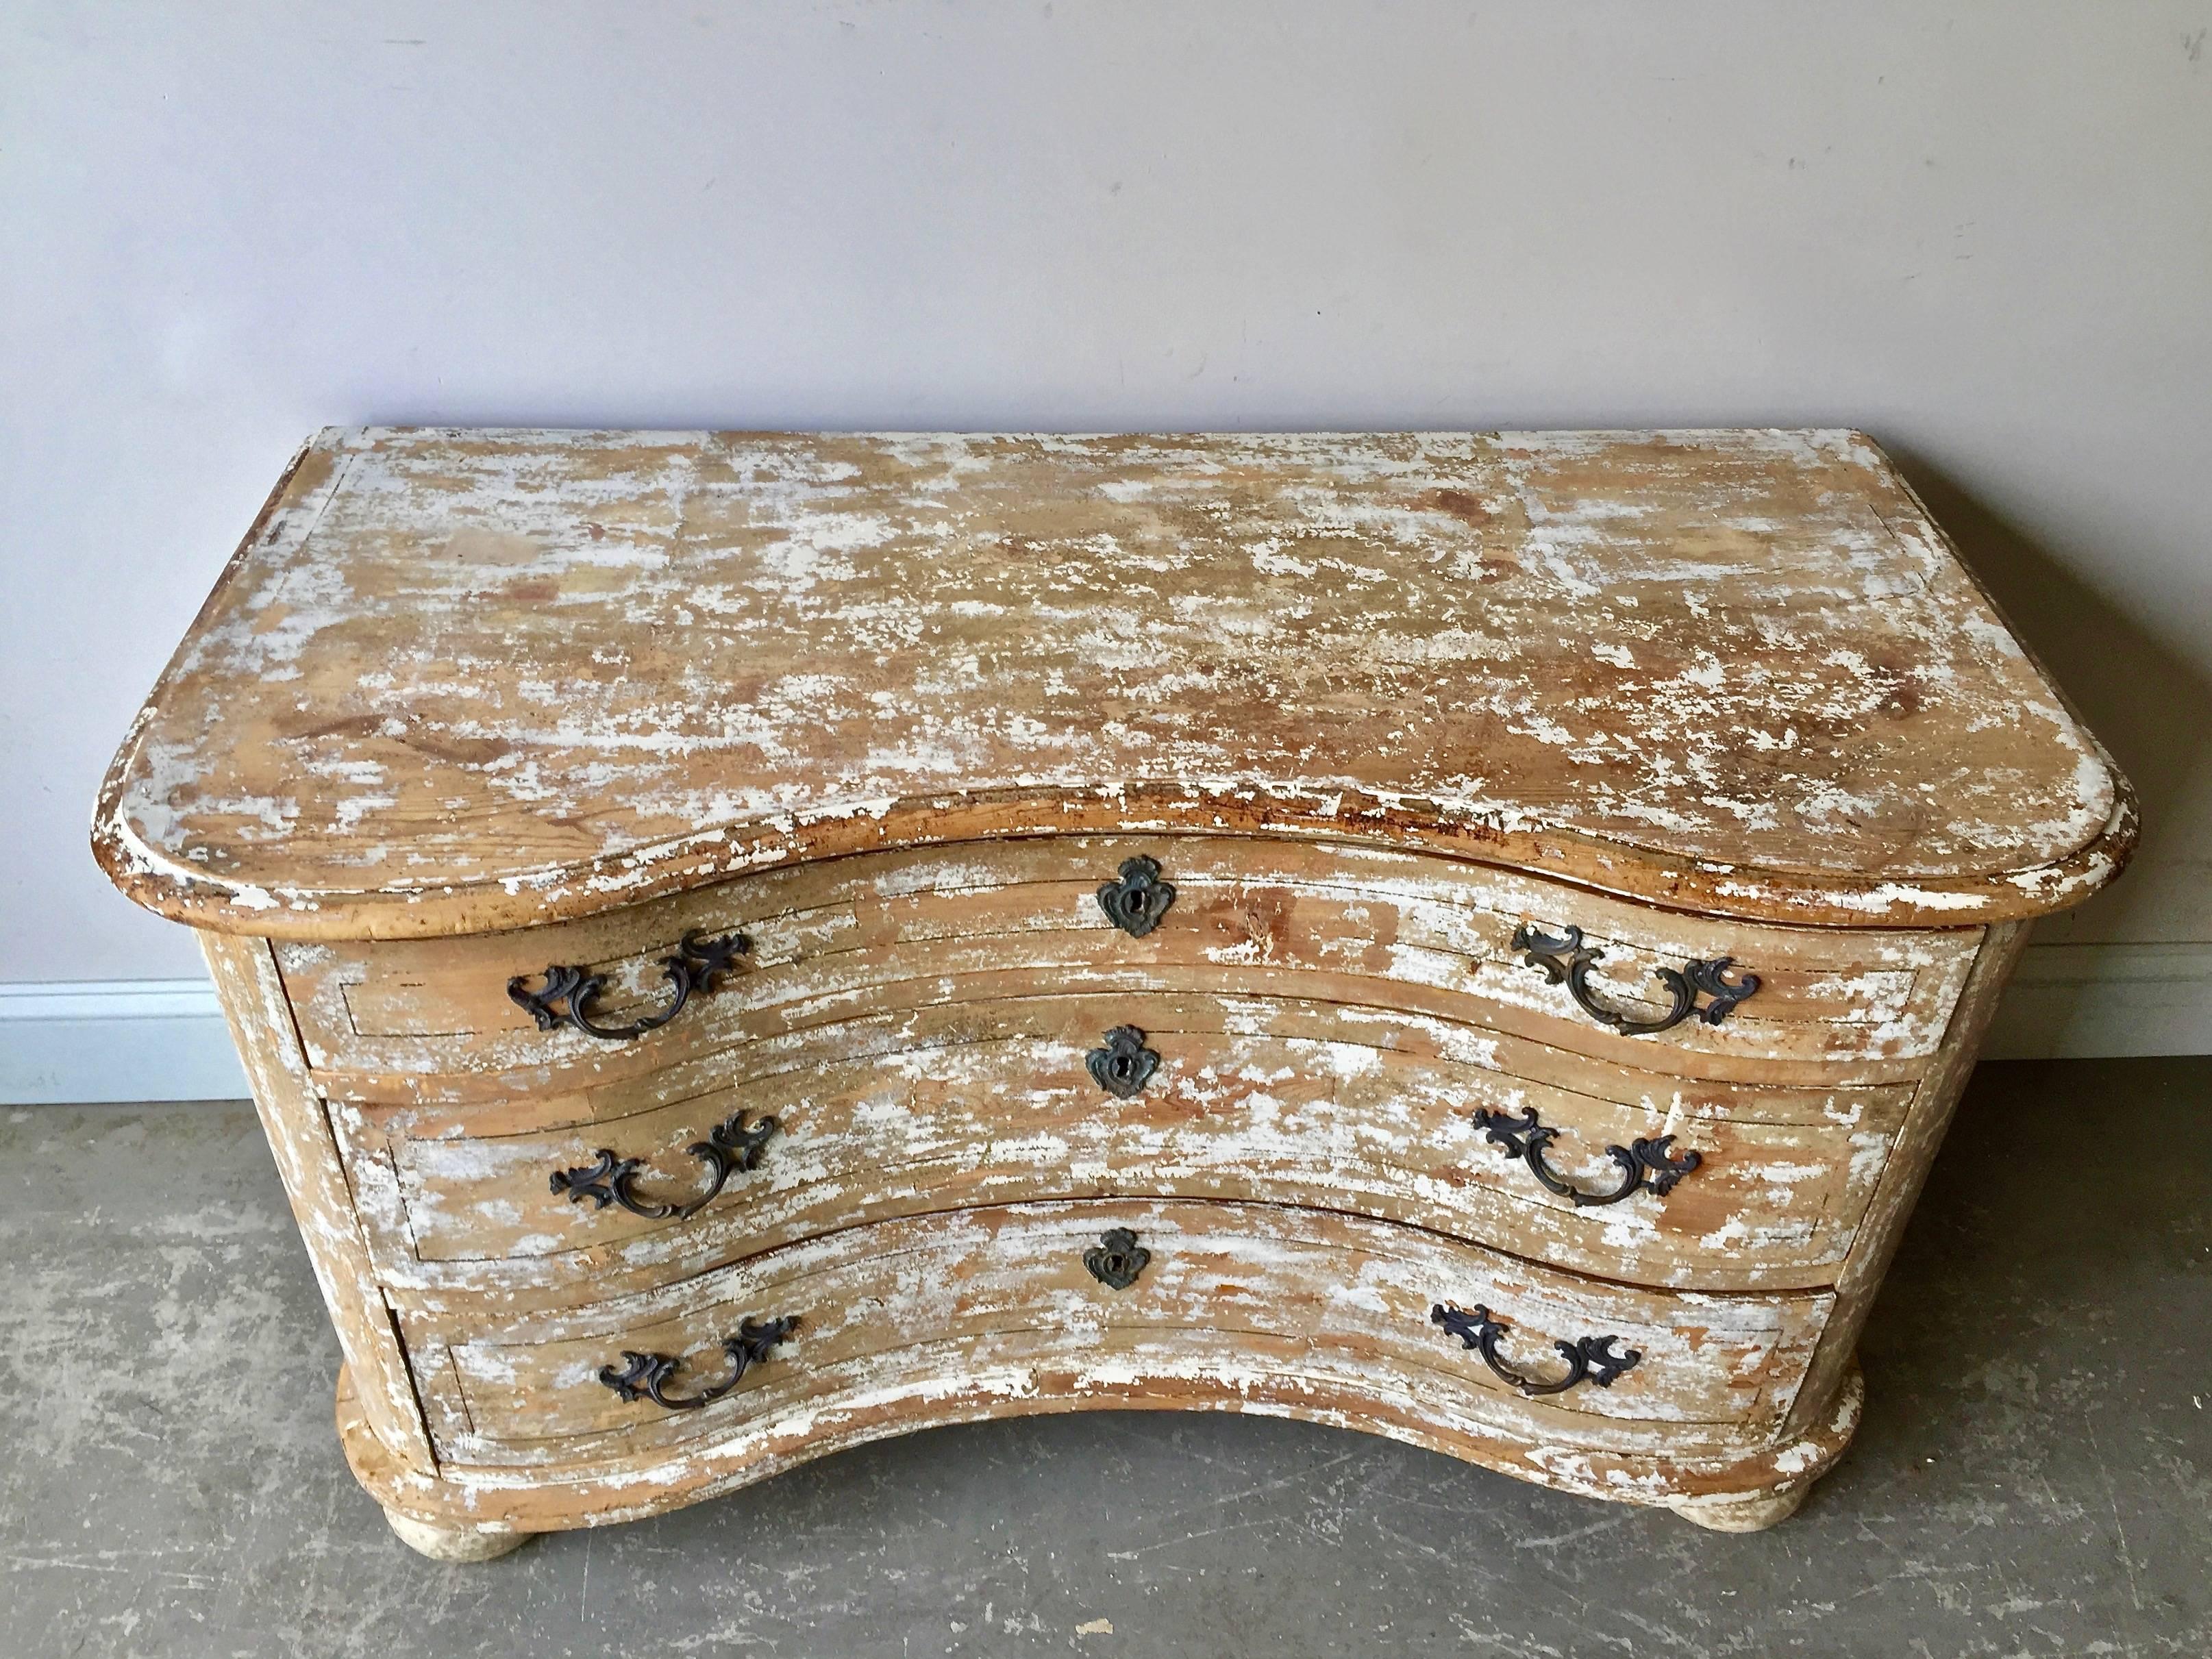 serpentine front chest of drawers